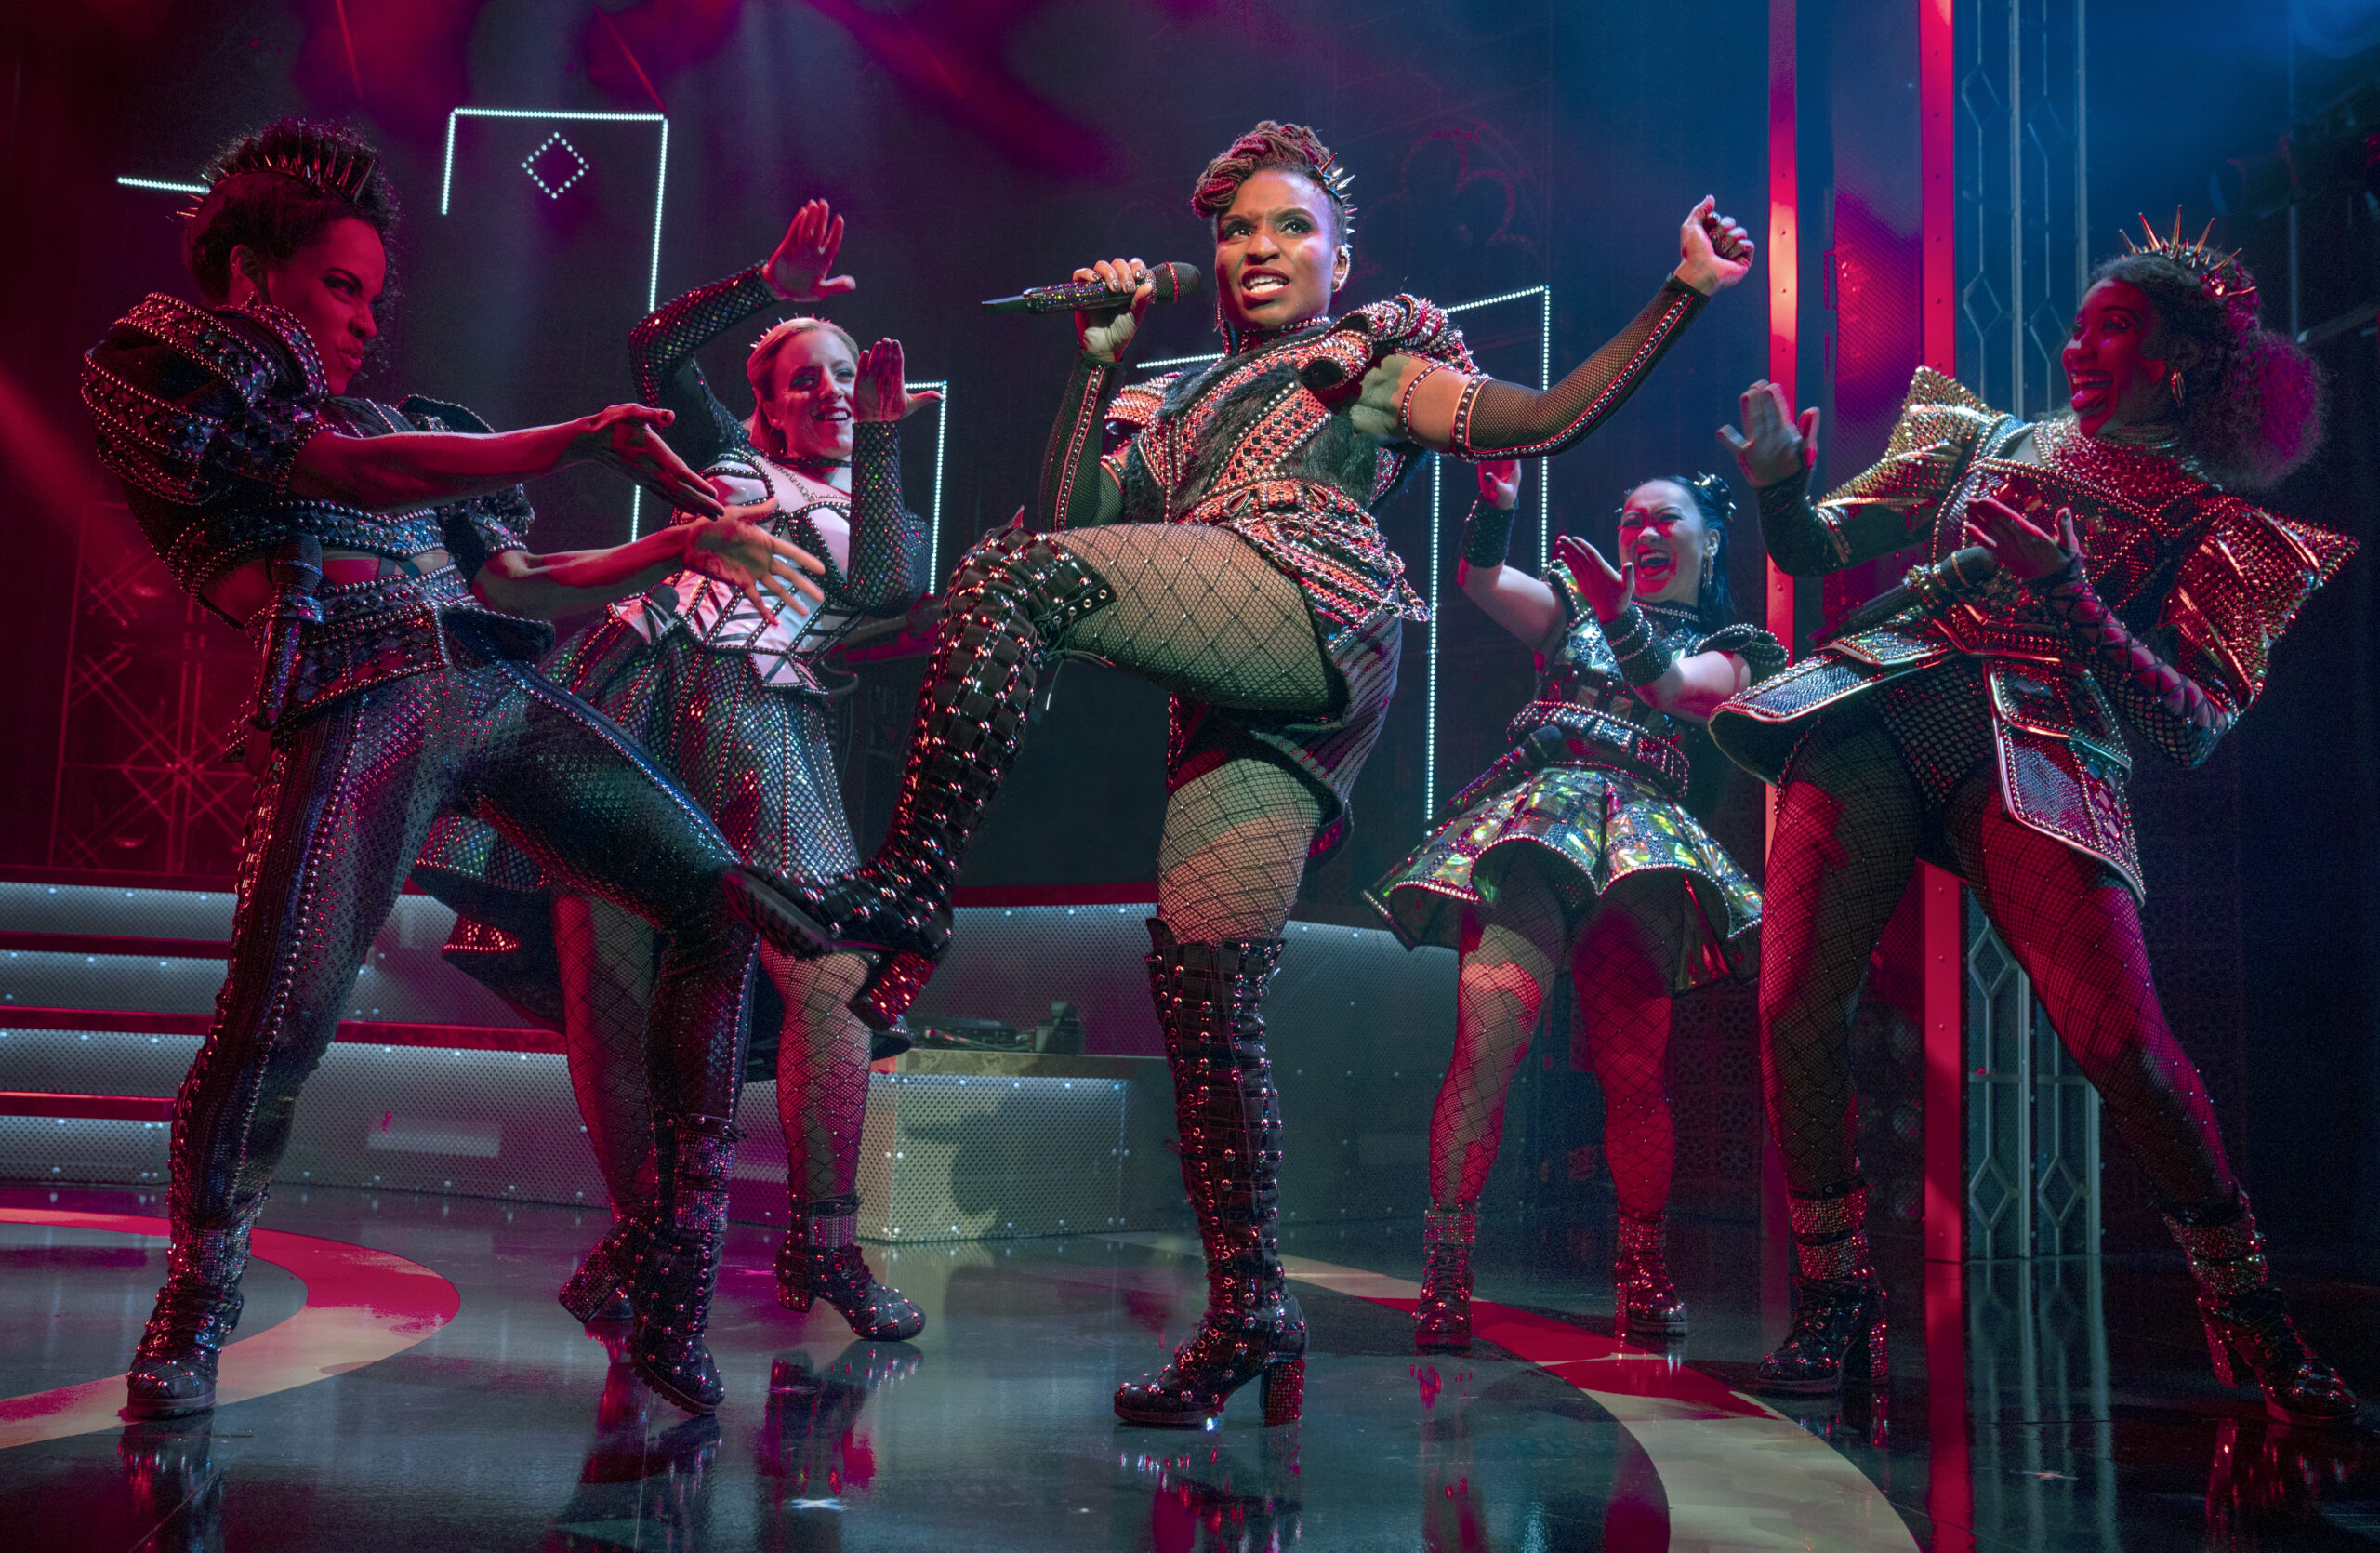 Brittney Mack portrays Anna of Cleves, center, during a performance of the musical "Six," at Broadway’s Brooks Atkinson Theatre in New York. Mack is slated to perform a mashup of some of its songs with her castmates and band in front of a televised audience of millions at the Macy’s Thanksgiving Day Parade. (Joan Marcus/Boneau/Bryan-Brown via AP)